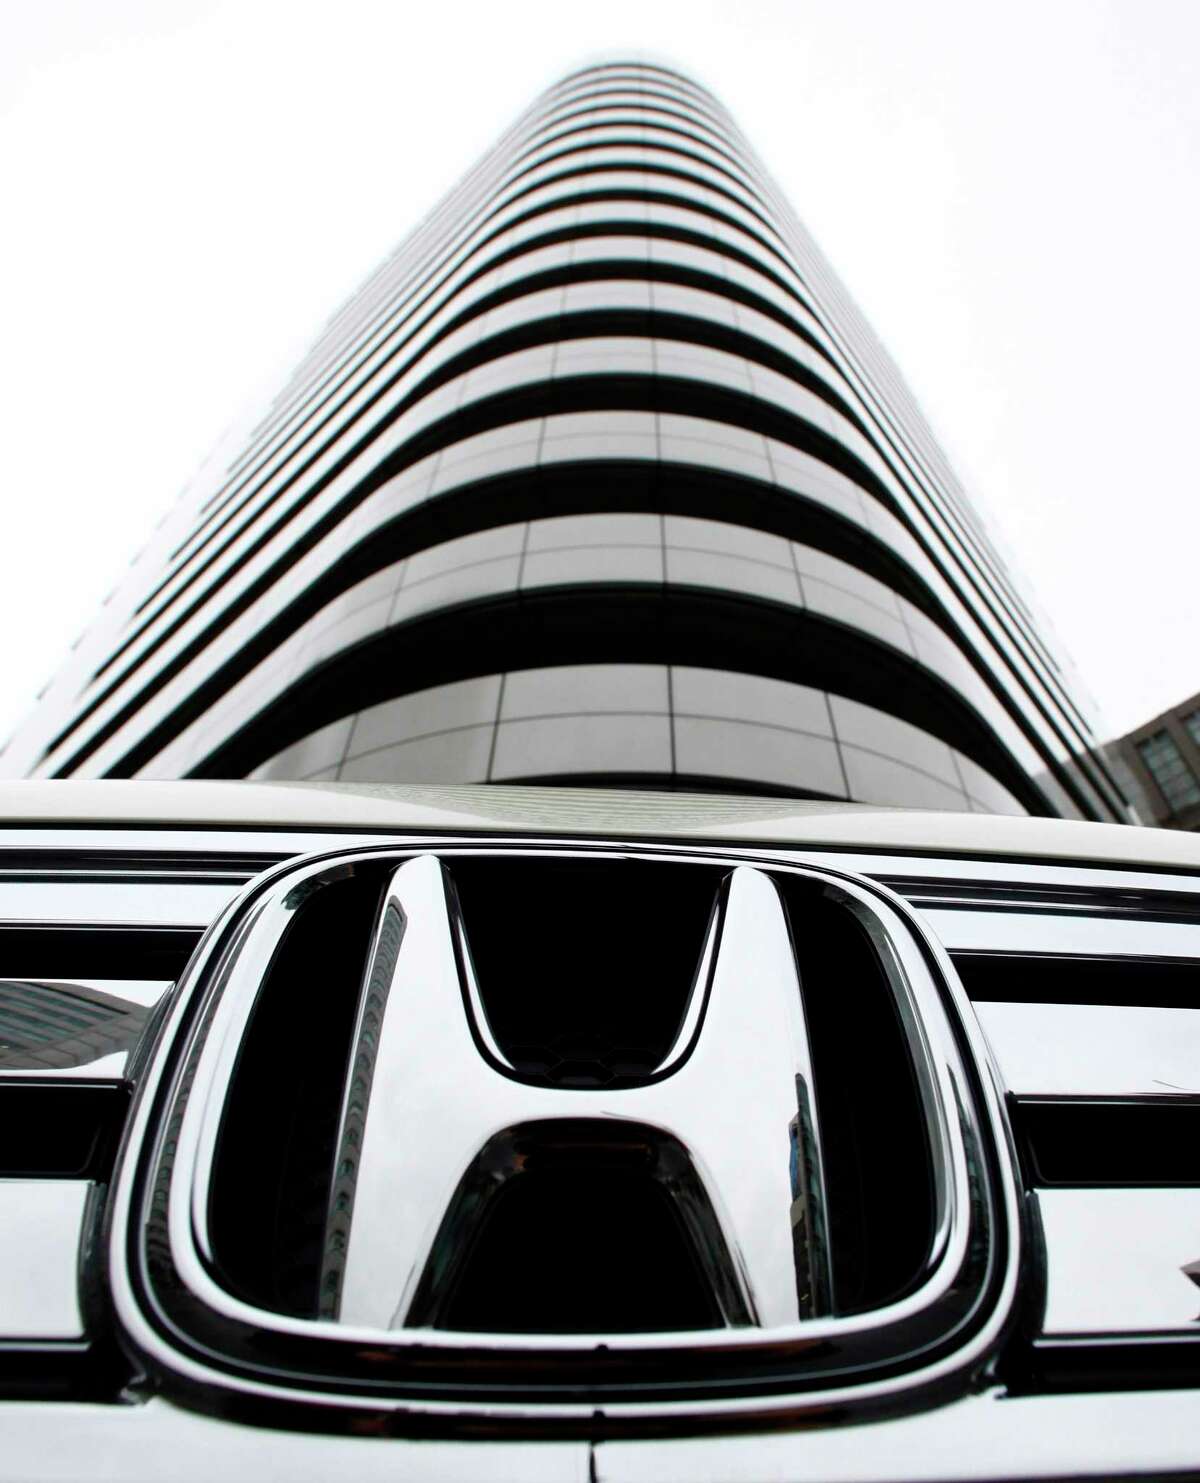 ﻿Honda Motor Co., with its headquarters in Tokyo, for years was Takata's biggest customer. ﻿